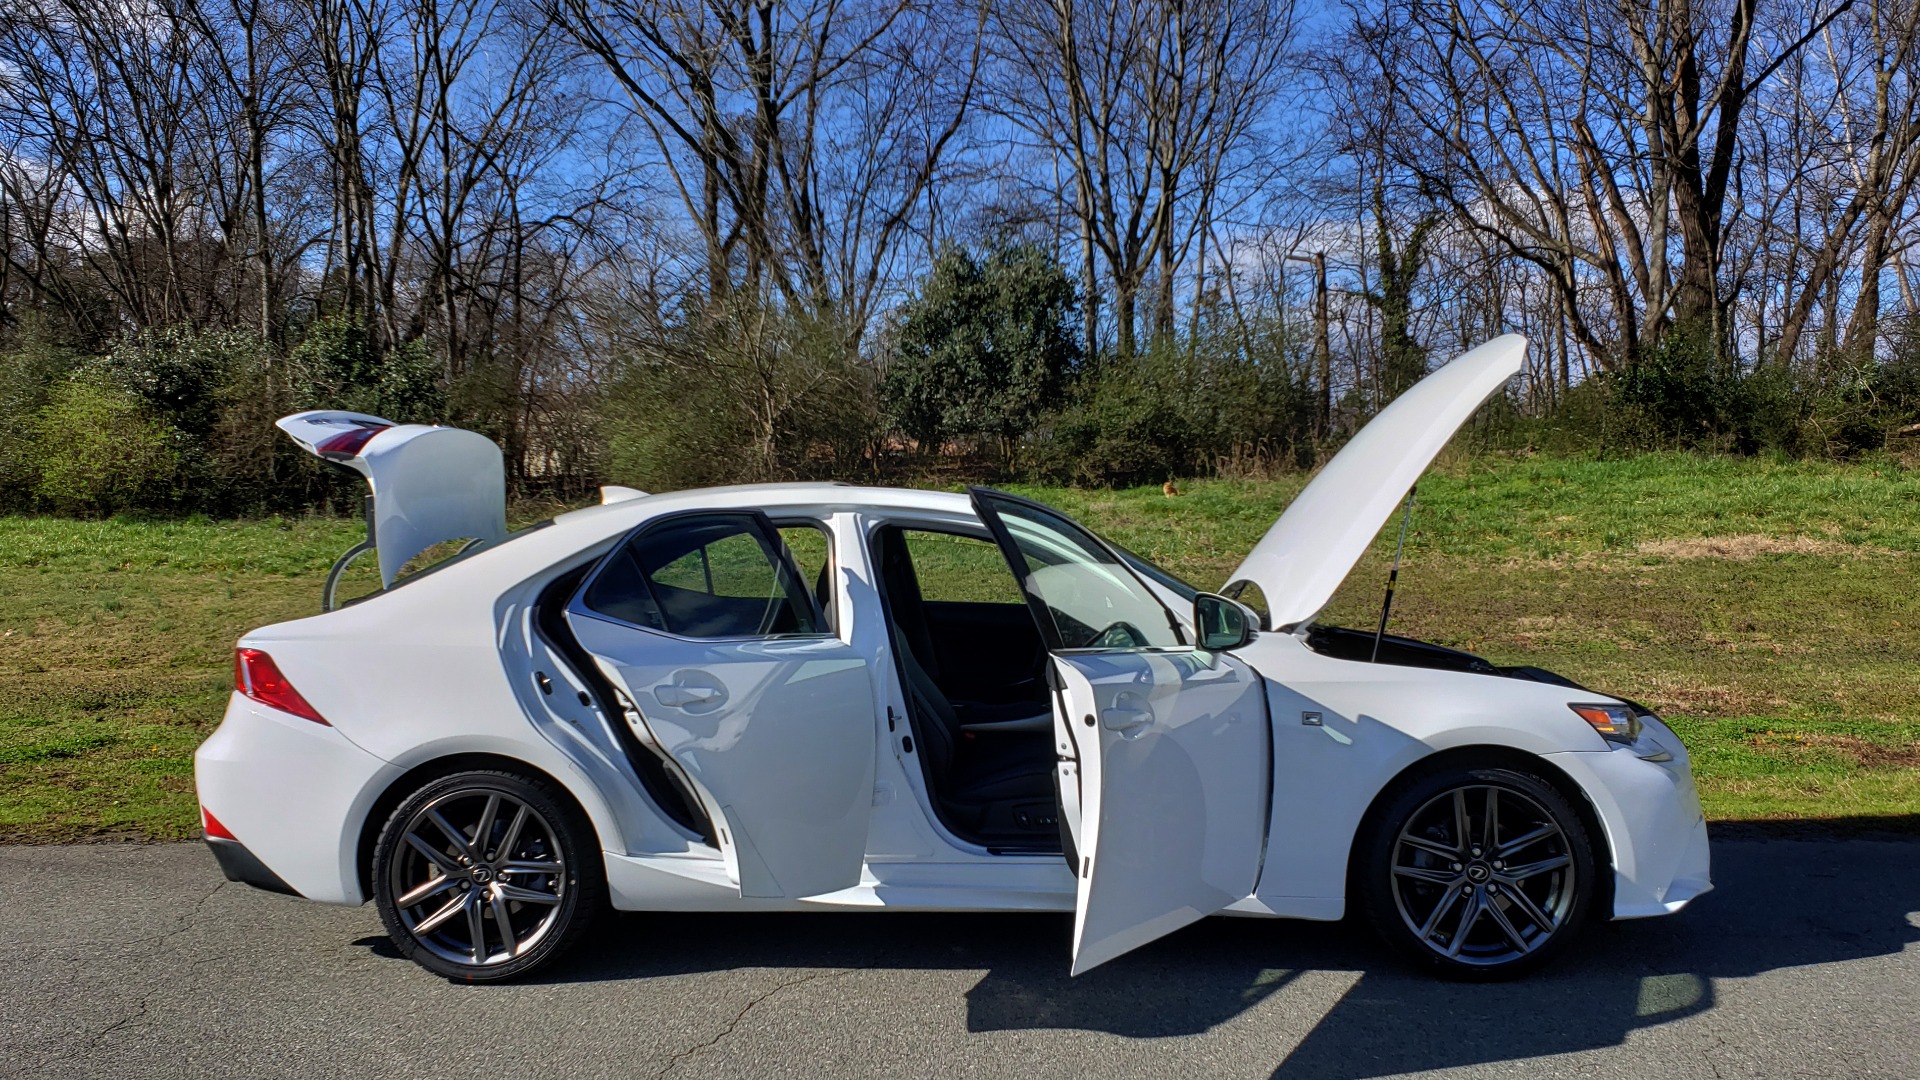 Used 2014 Lexus IS 250 F-SPORT / NAV / SUNROOF / REARVIEW / BSM for sale Sold at Formula Imports in Charlotte NC 28227 10